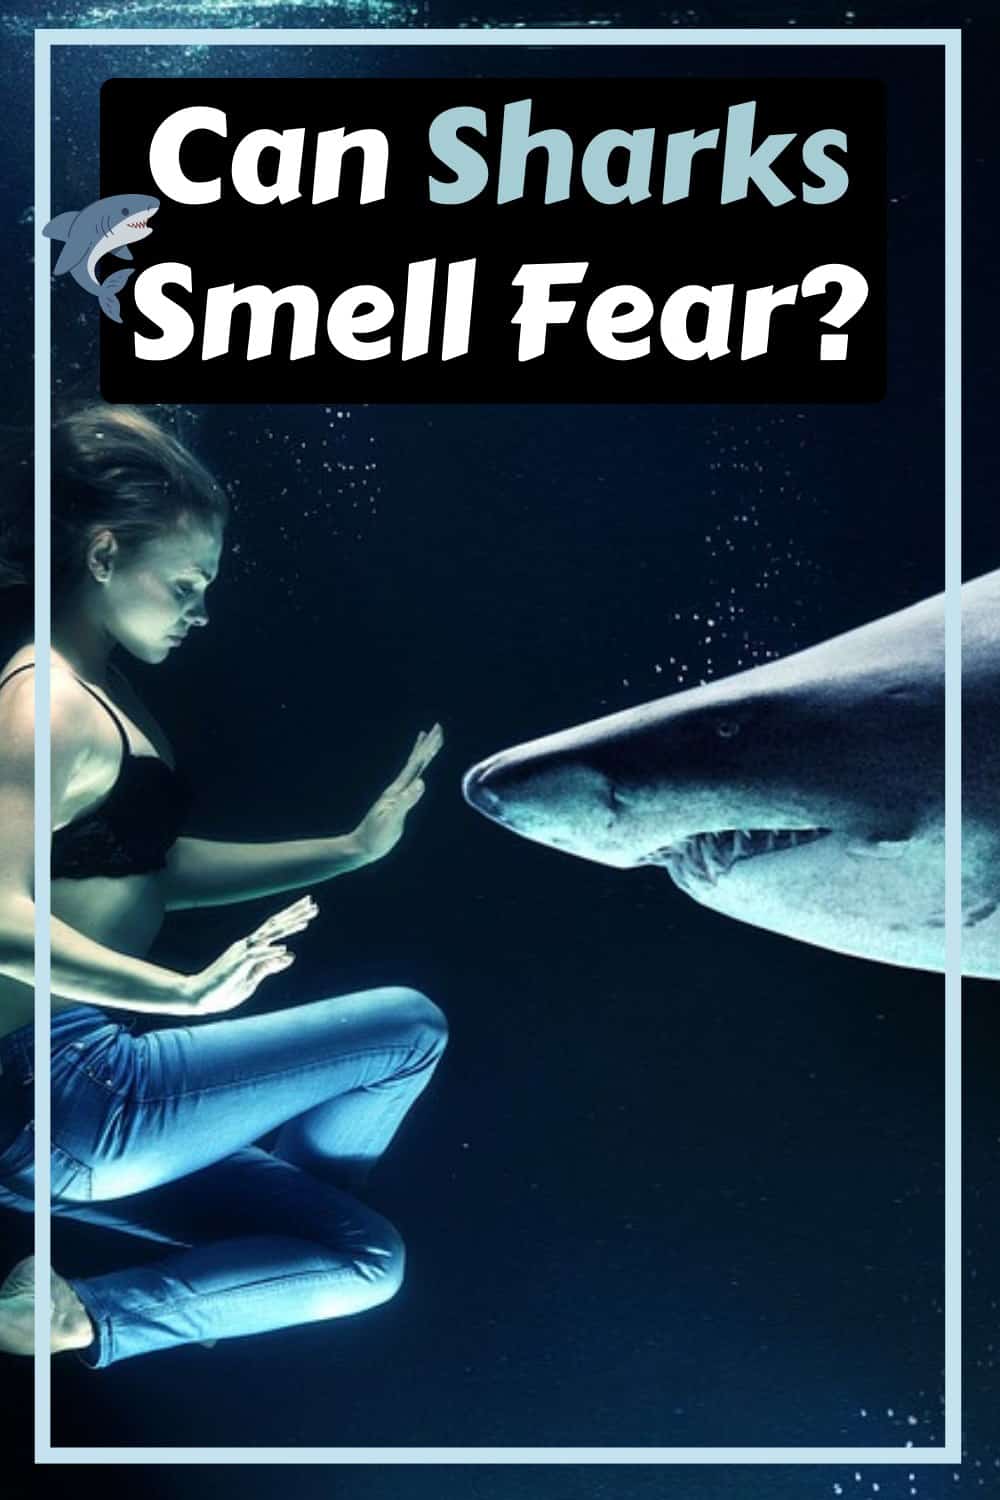 Sharks can not smell fear